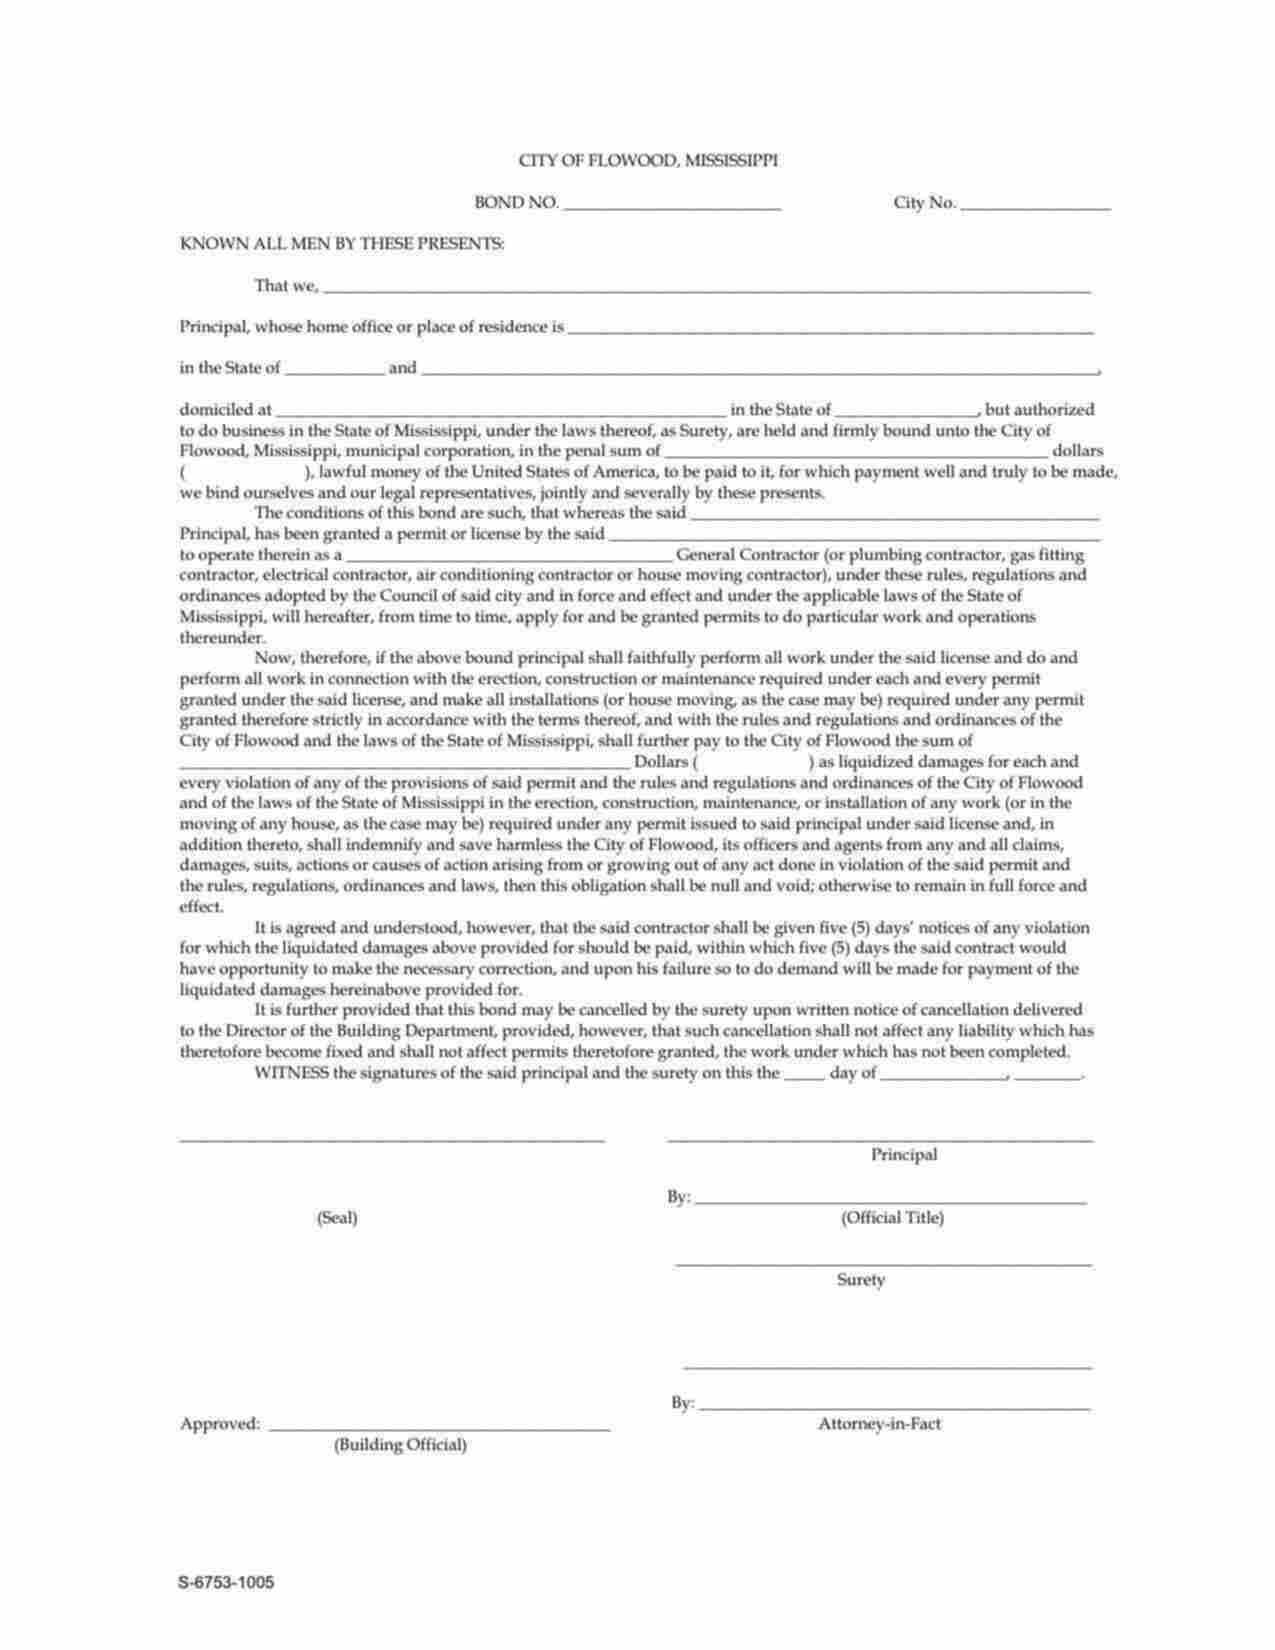 Mississippi Air Conditioning Contractor Bond Form